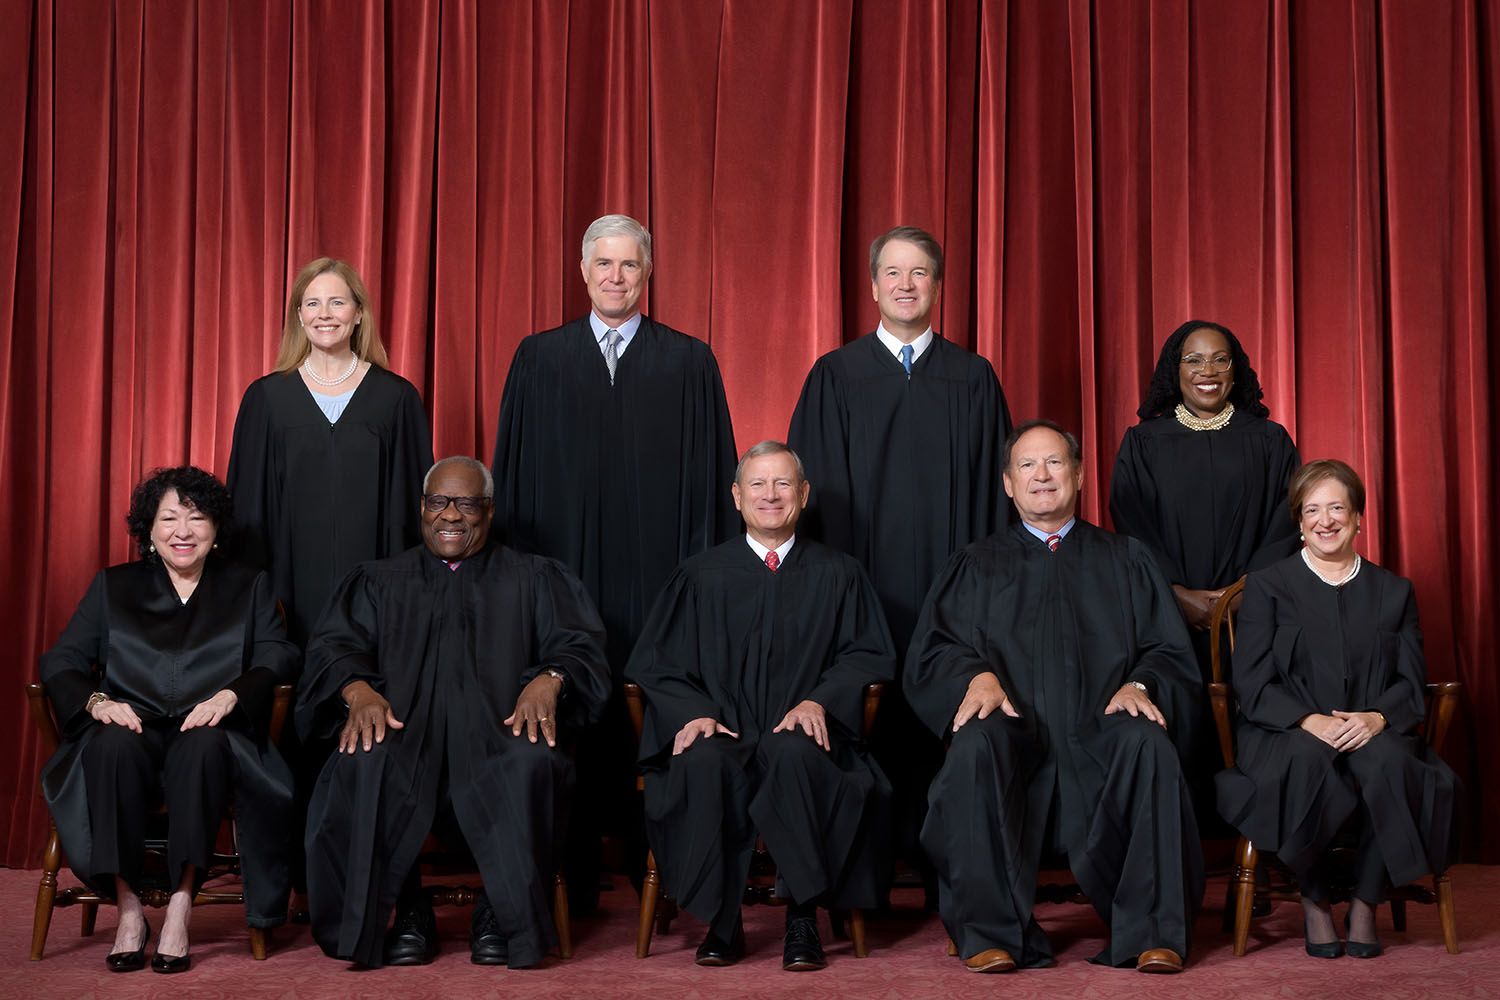 All nine justices pose in front of a red curtain